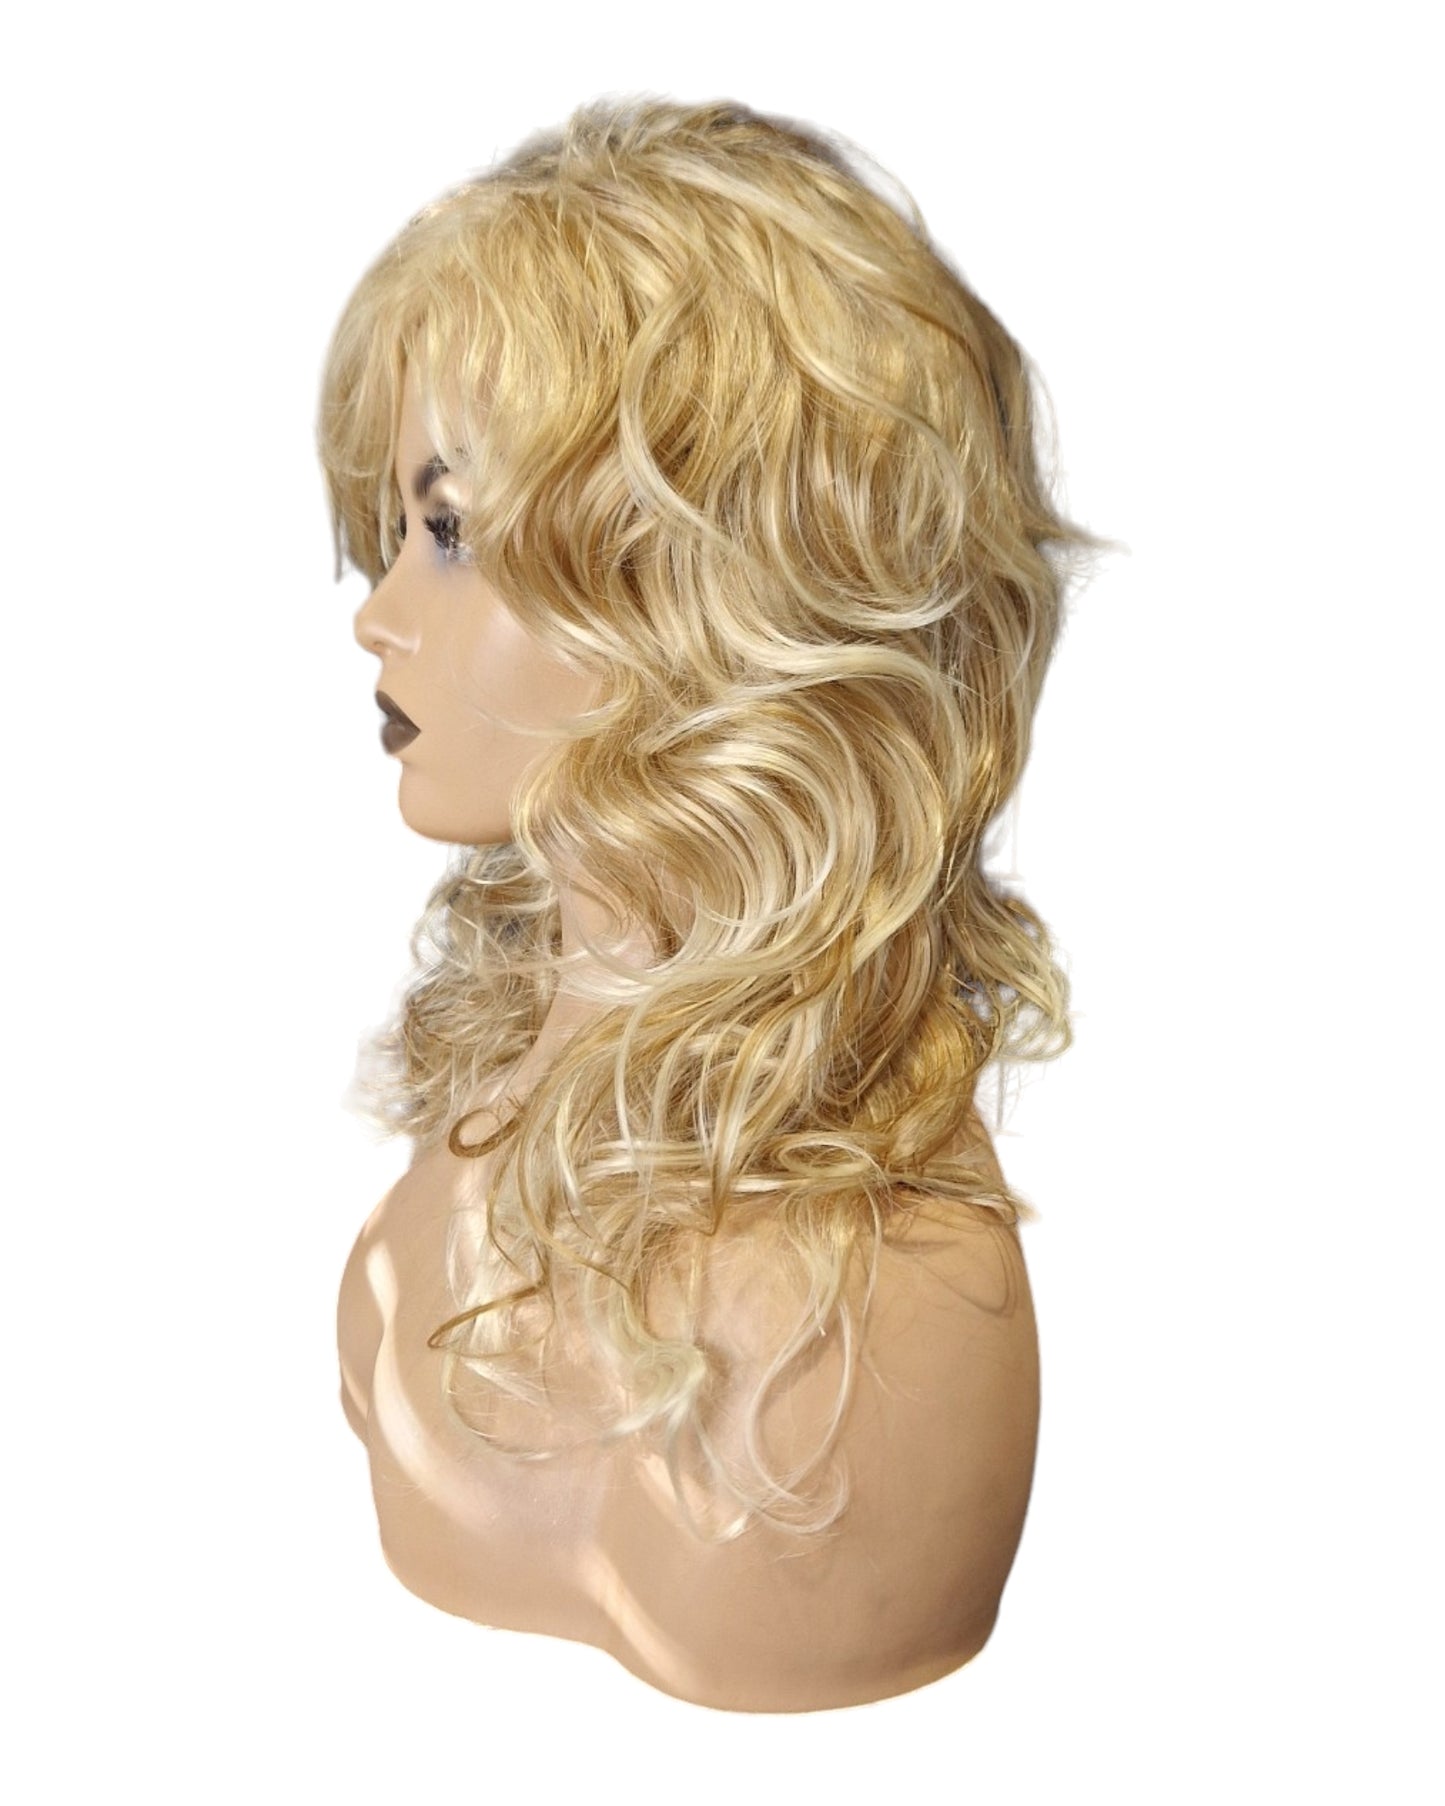 Blonde Dolly Curly Style Wig. Wren